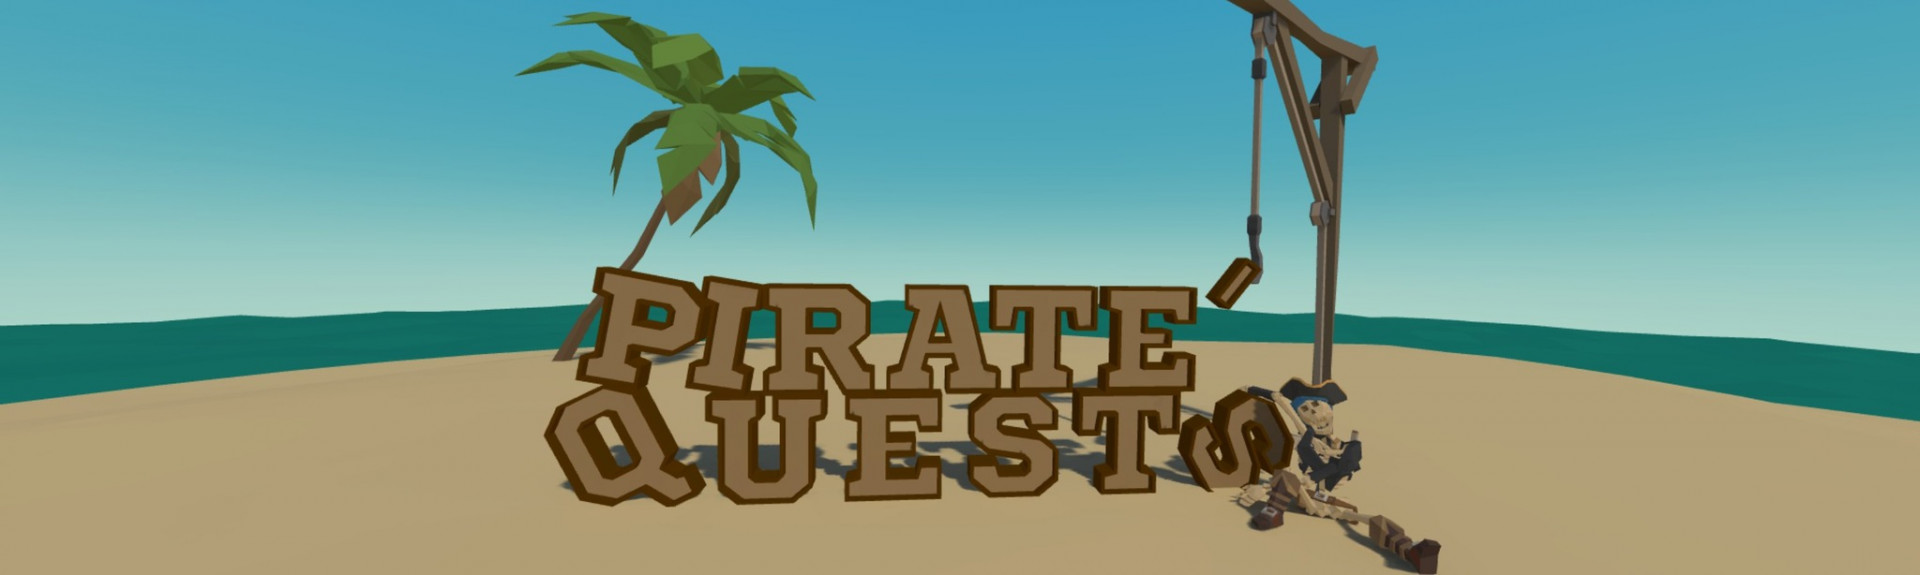 Pirate's Quest - Research Experience